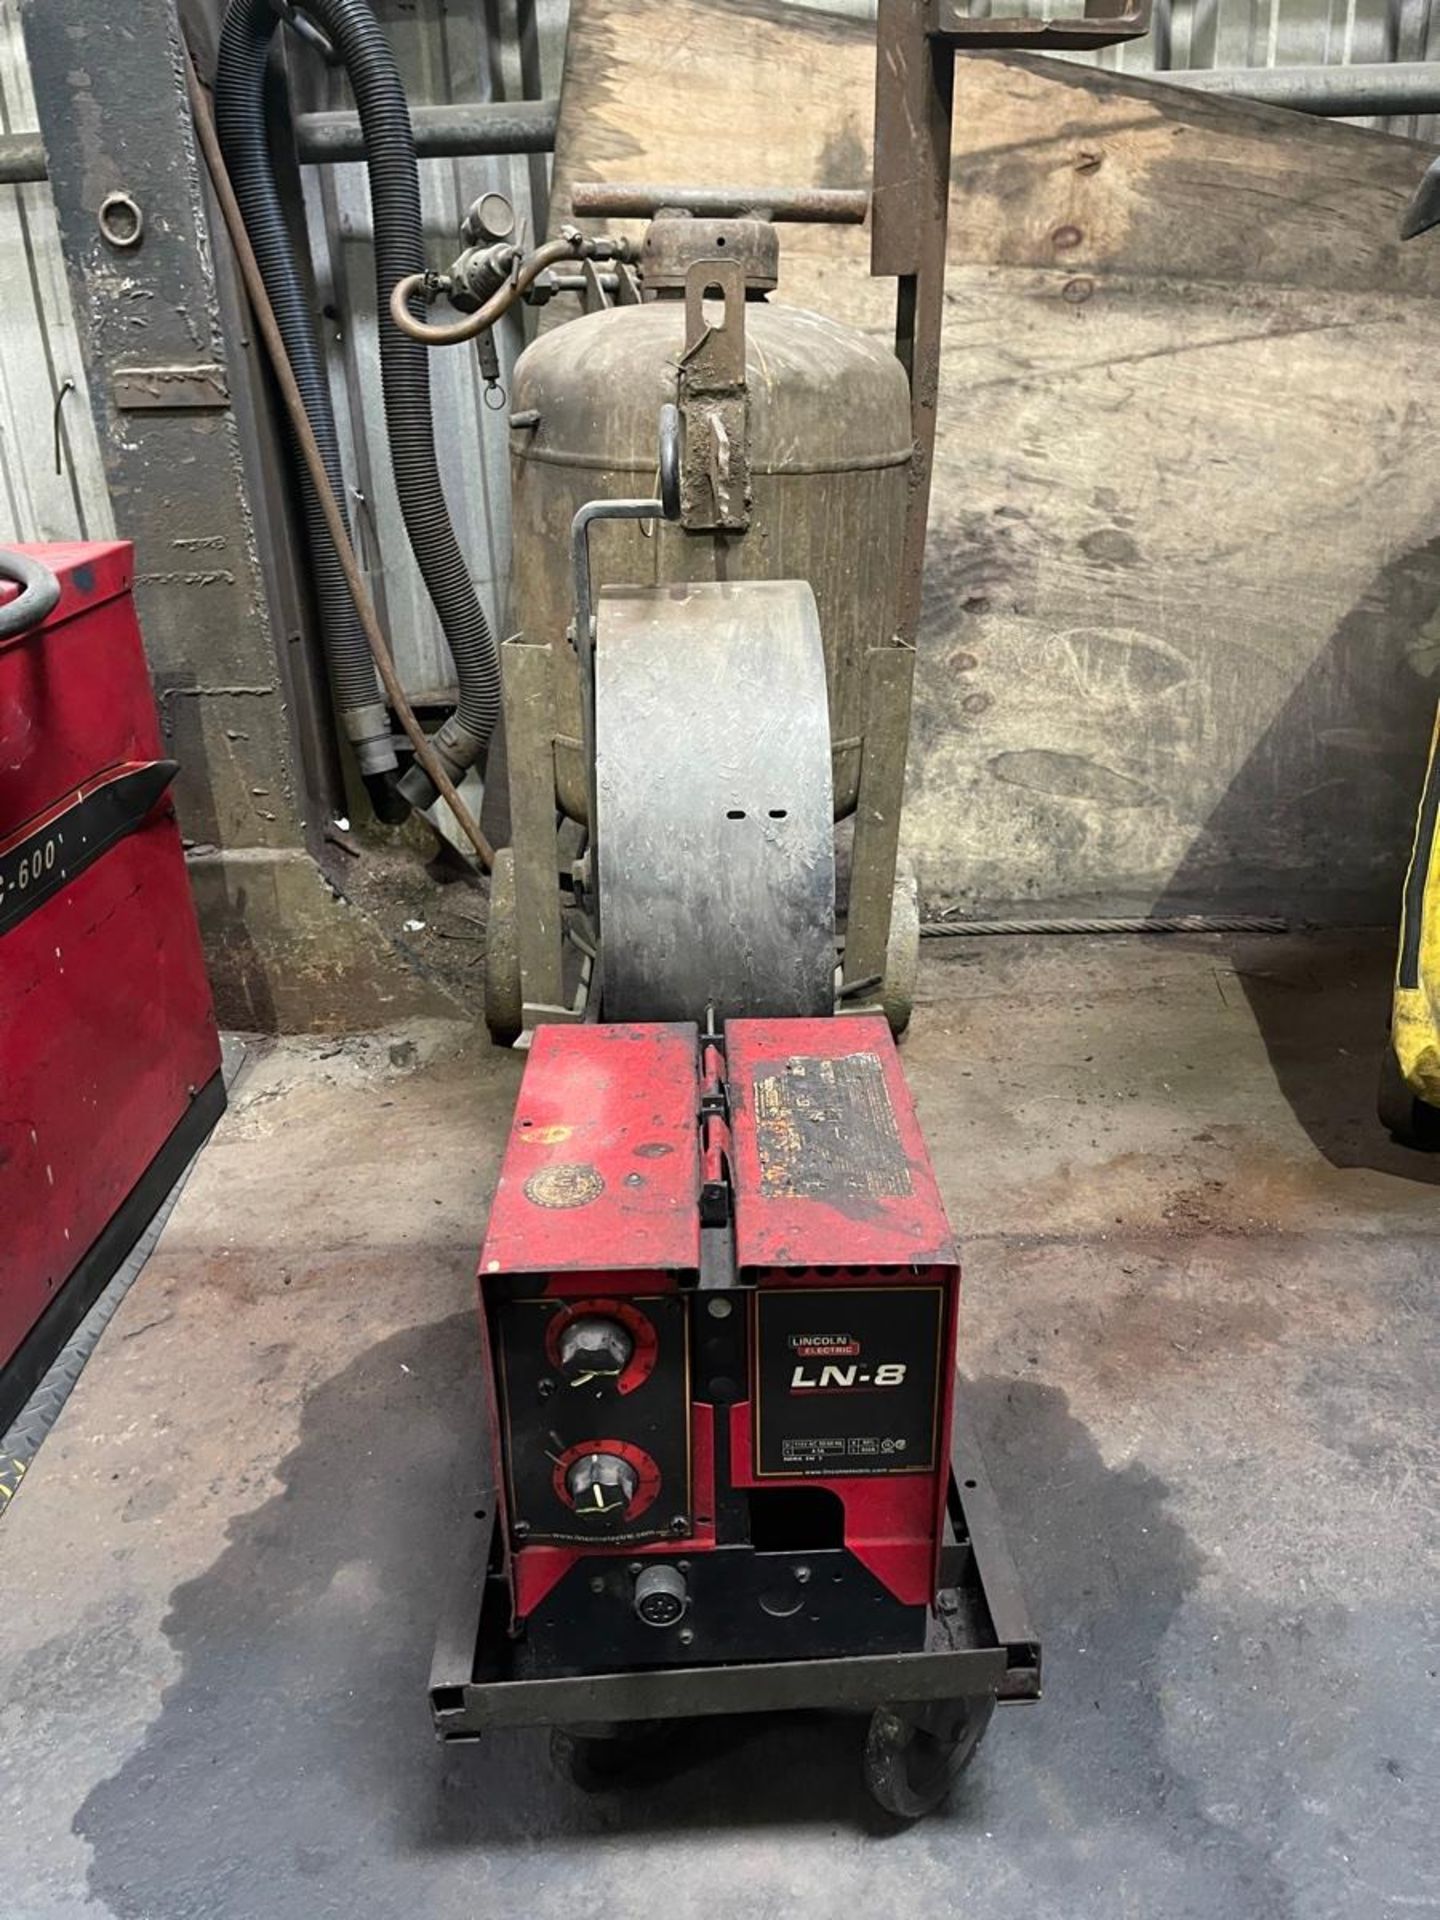 Lincoln Electric IDEALARC DC600 Multiprocess Welder - Image 2 of 3